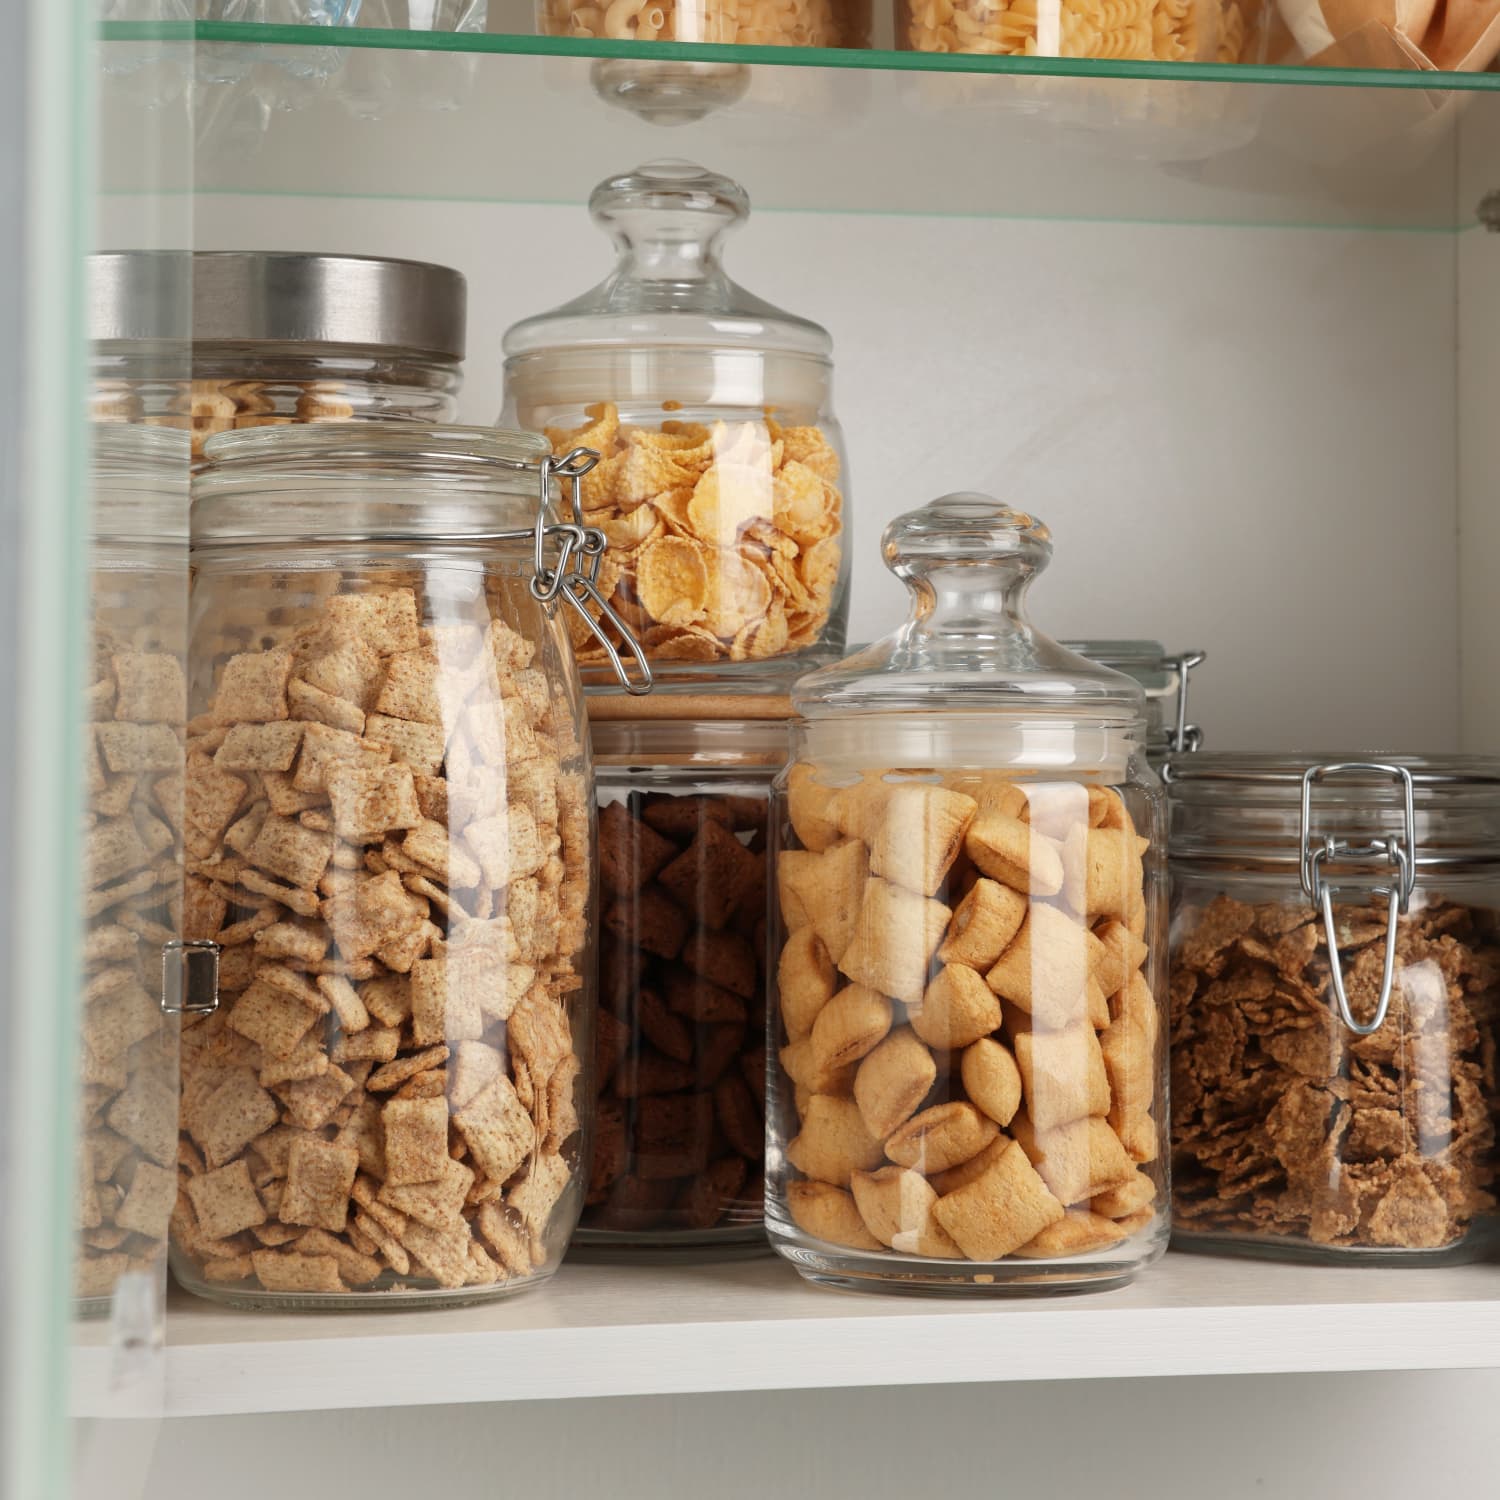 Best Pantry Canisters for Decanting - Life with Less Mess